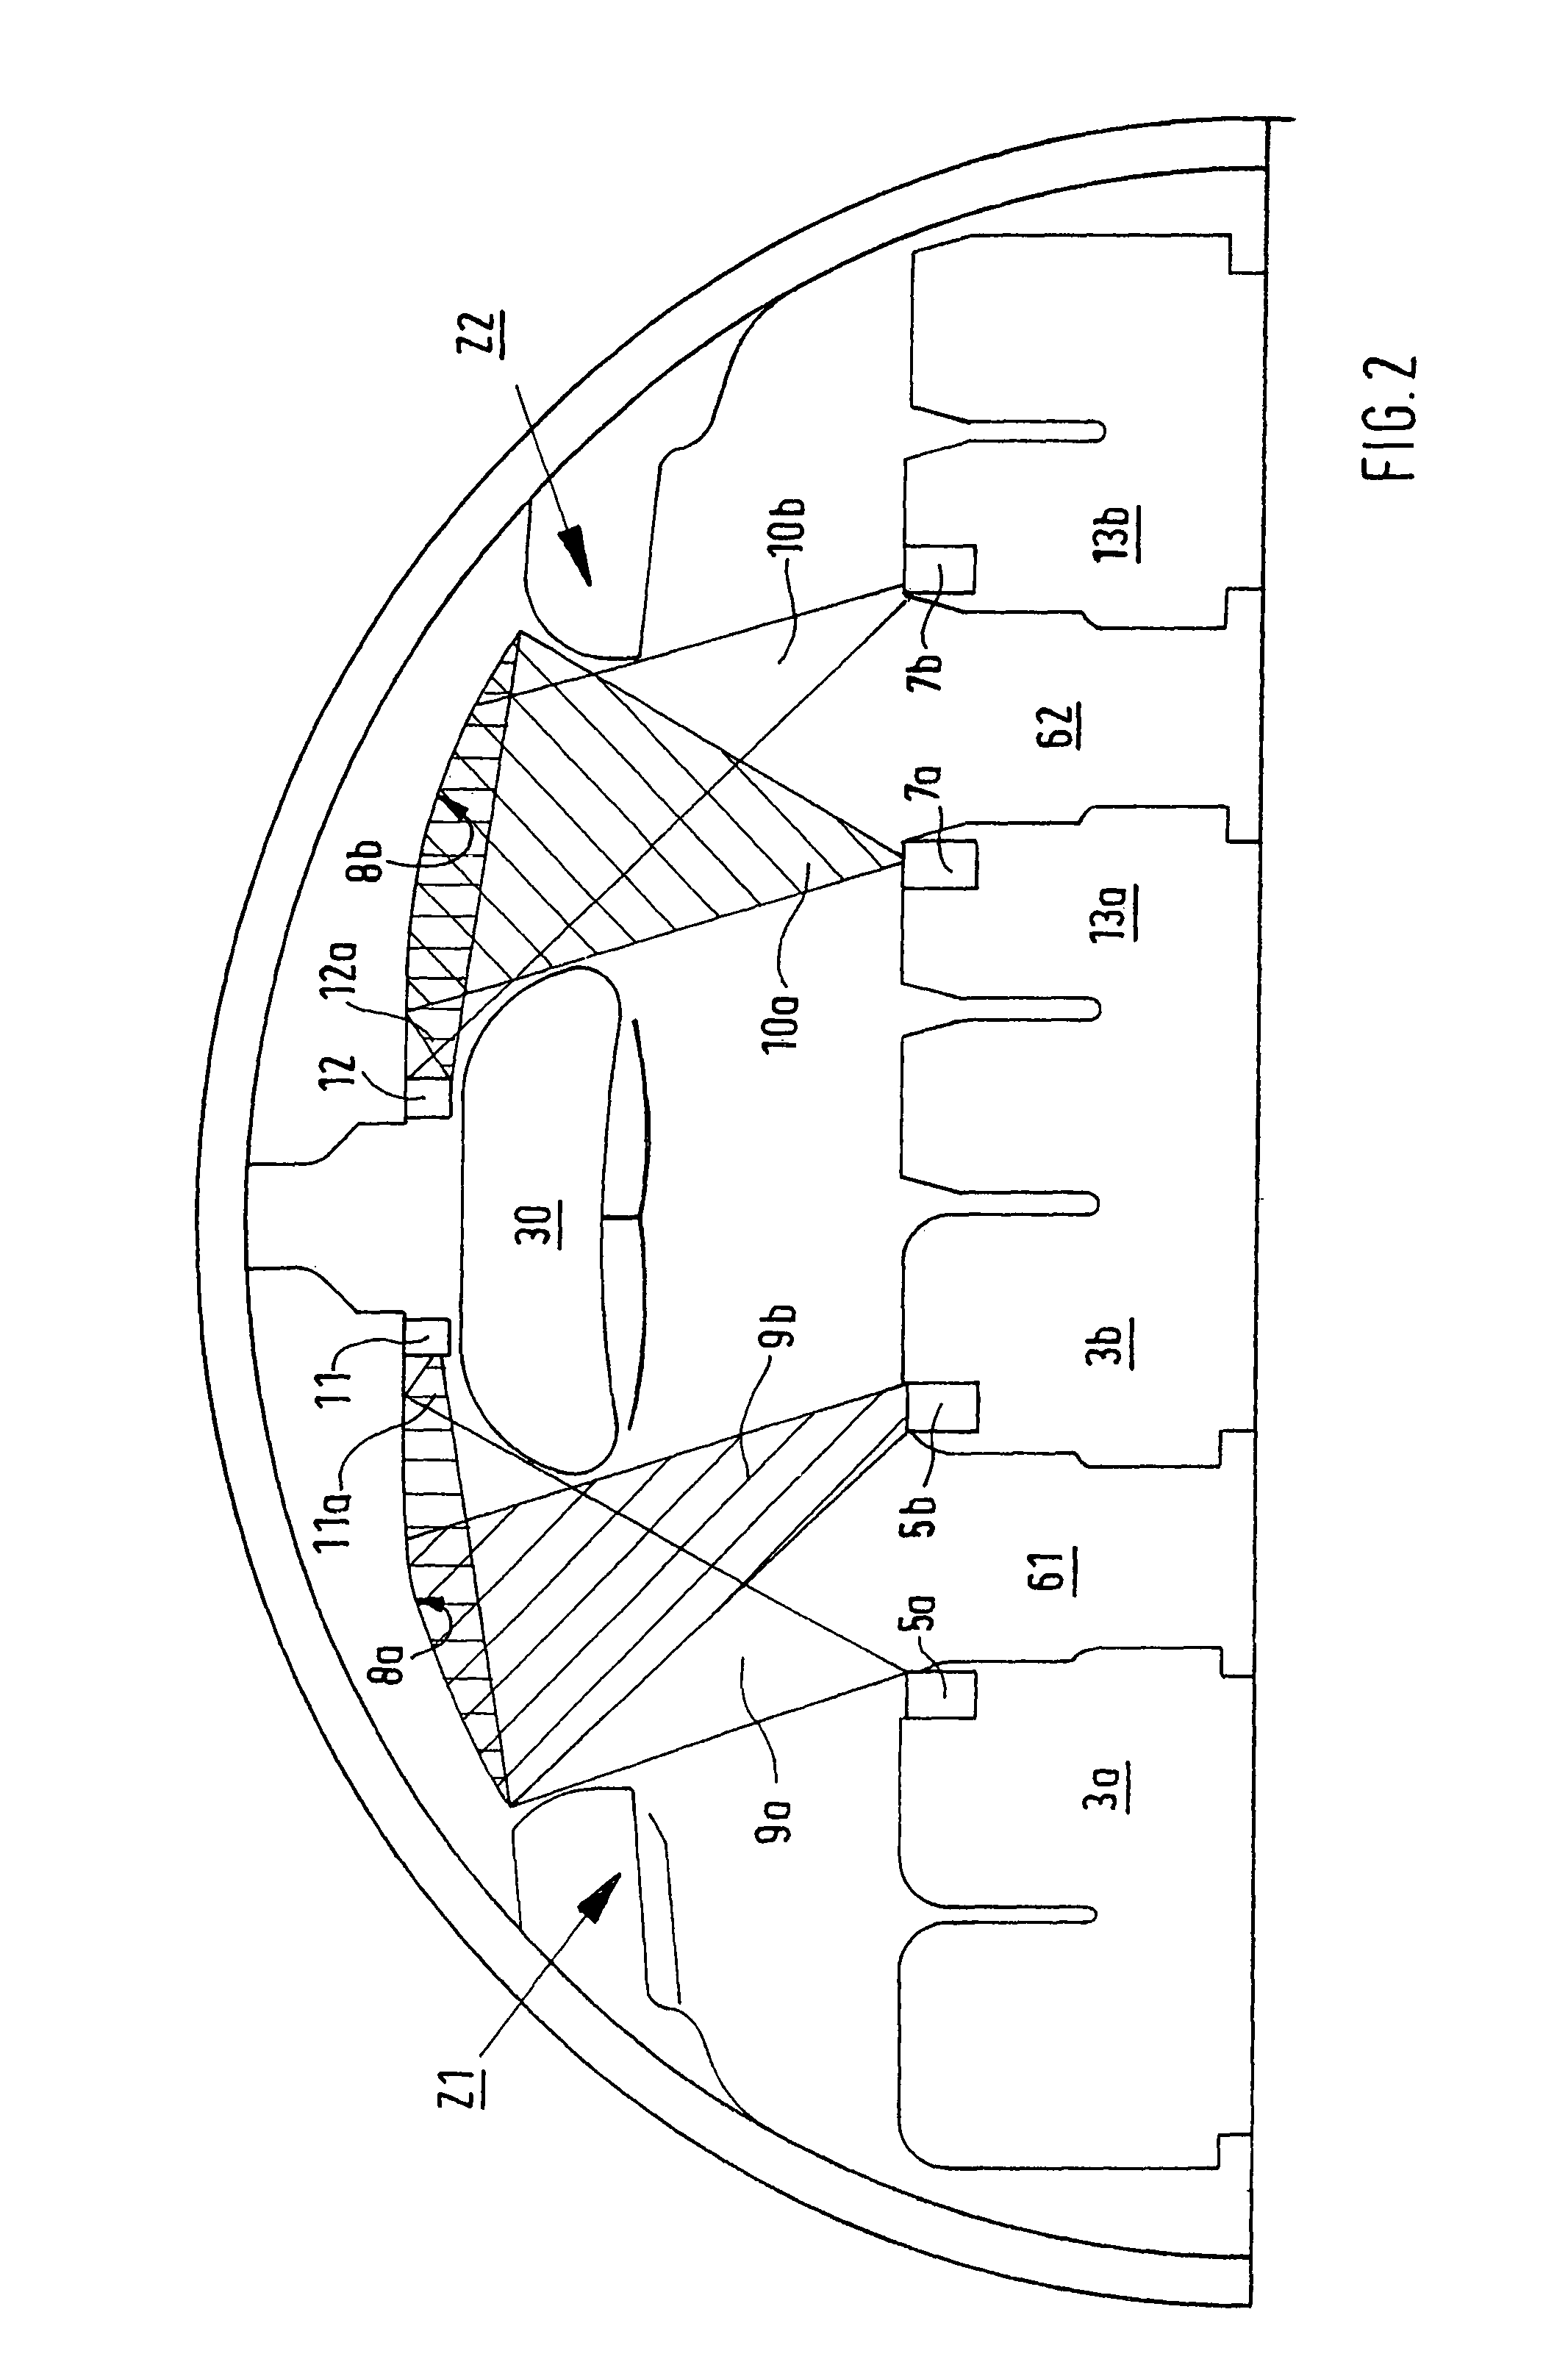 Indirect optical free-space communications system and method for the broadband transmission of high-speed data